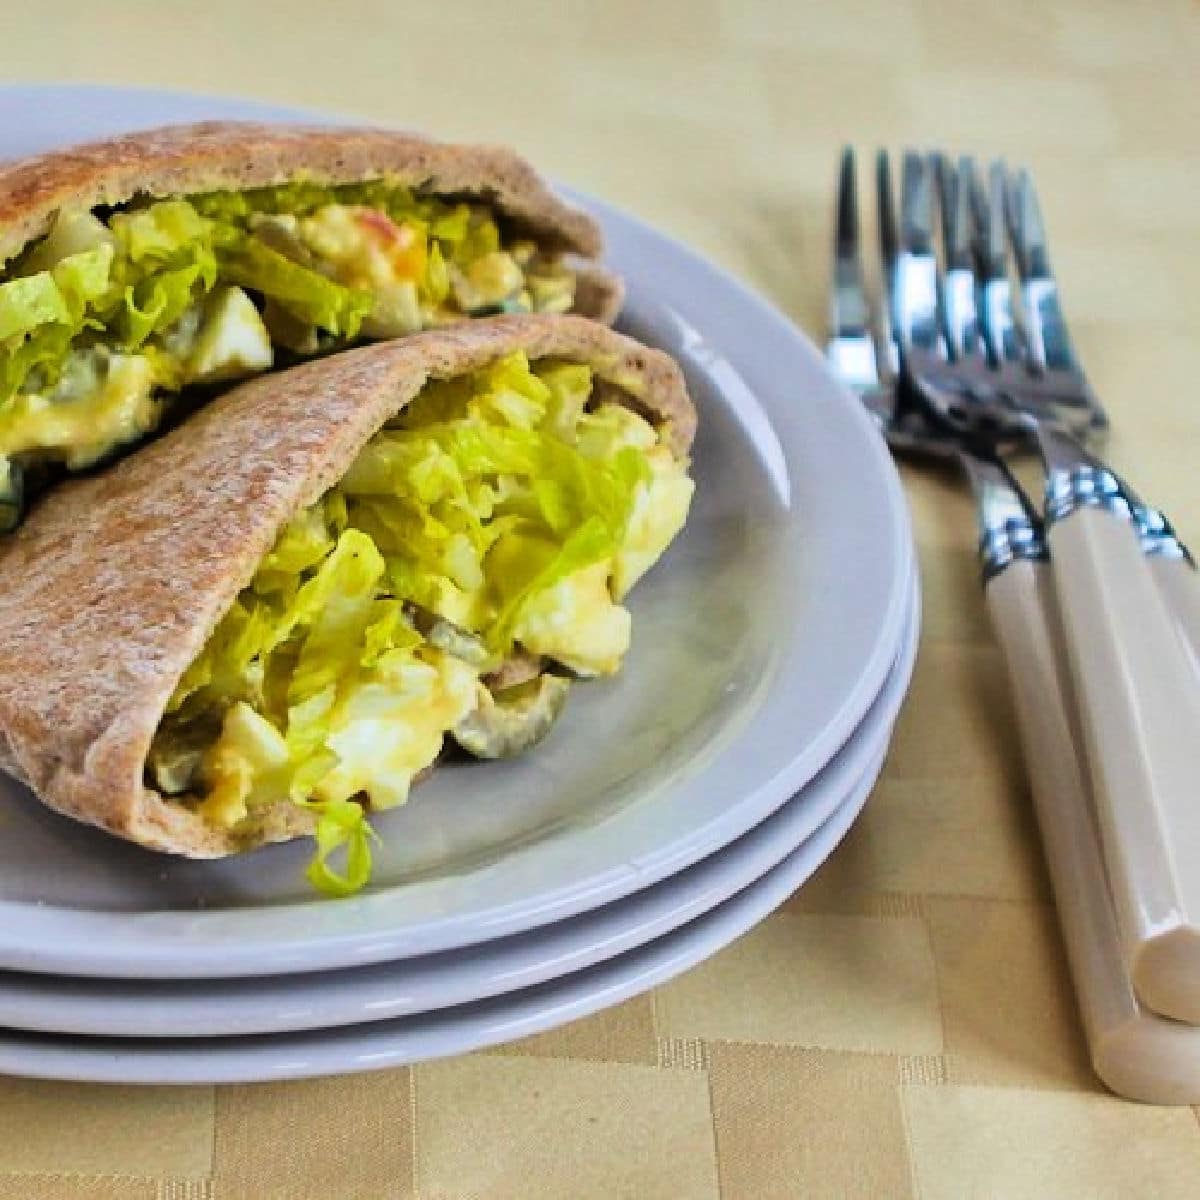 Square image for Egg Salad Pita with Green Olives shown with two pita halves on plate.